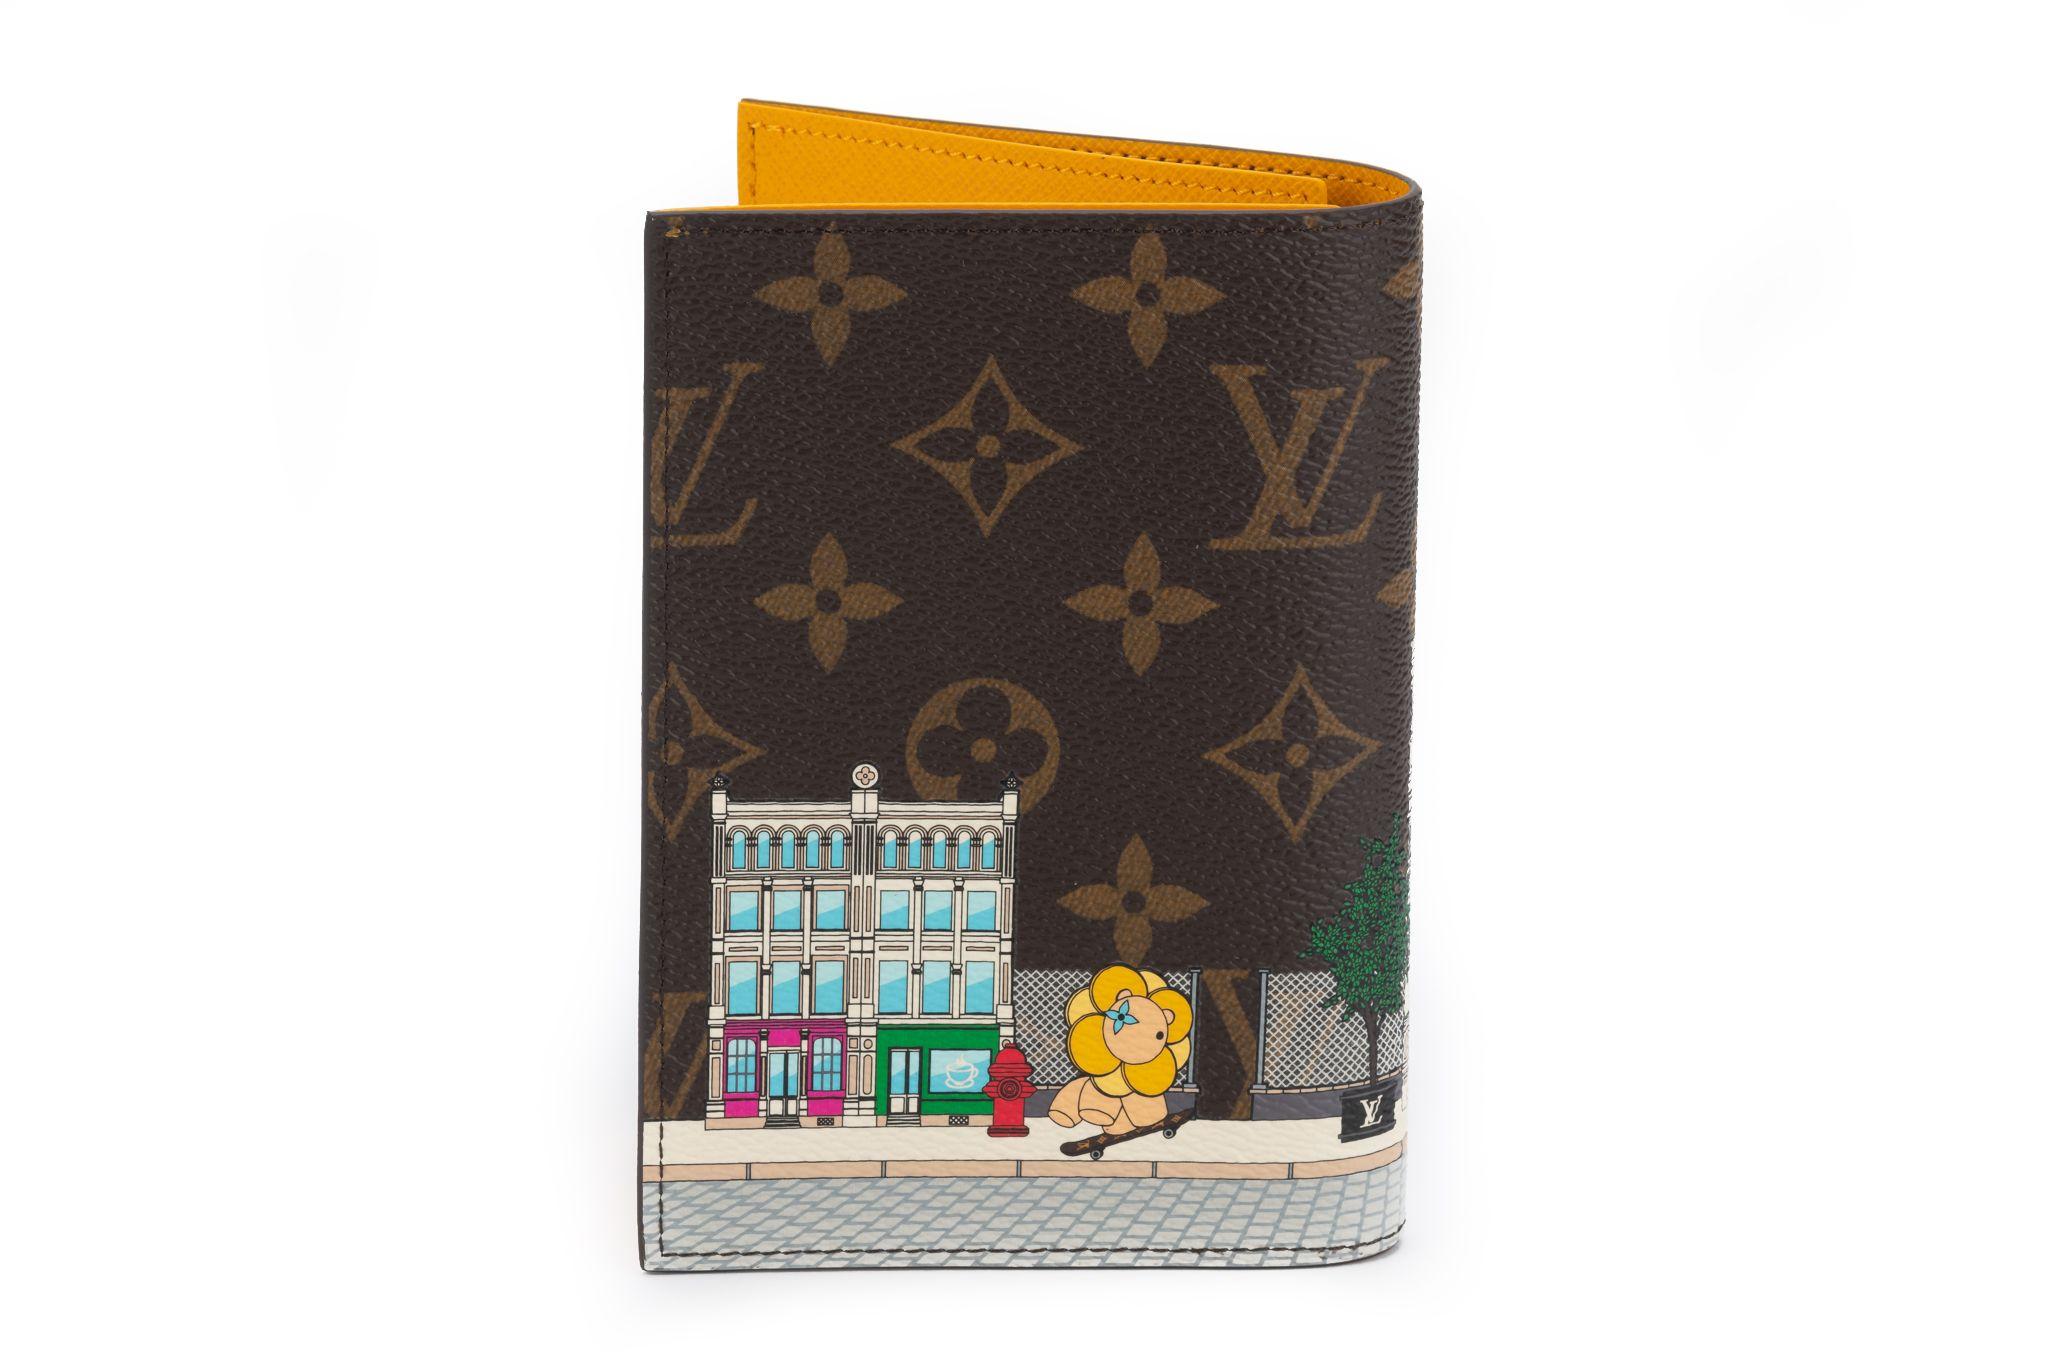 Louis Vuitton Passport Cover in yellow belongs to the Vivienne Holidays 2022 collection. Very collectible. It's brand new and comes with the original dustcover and box.